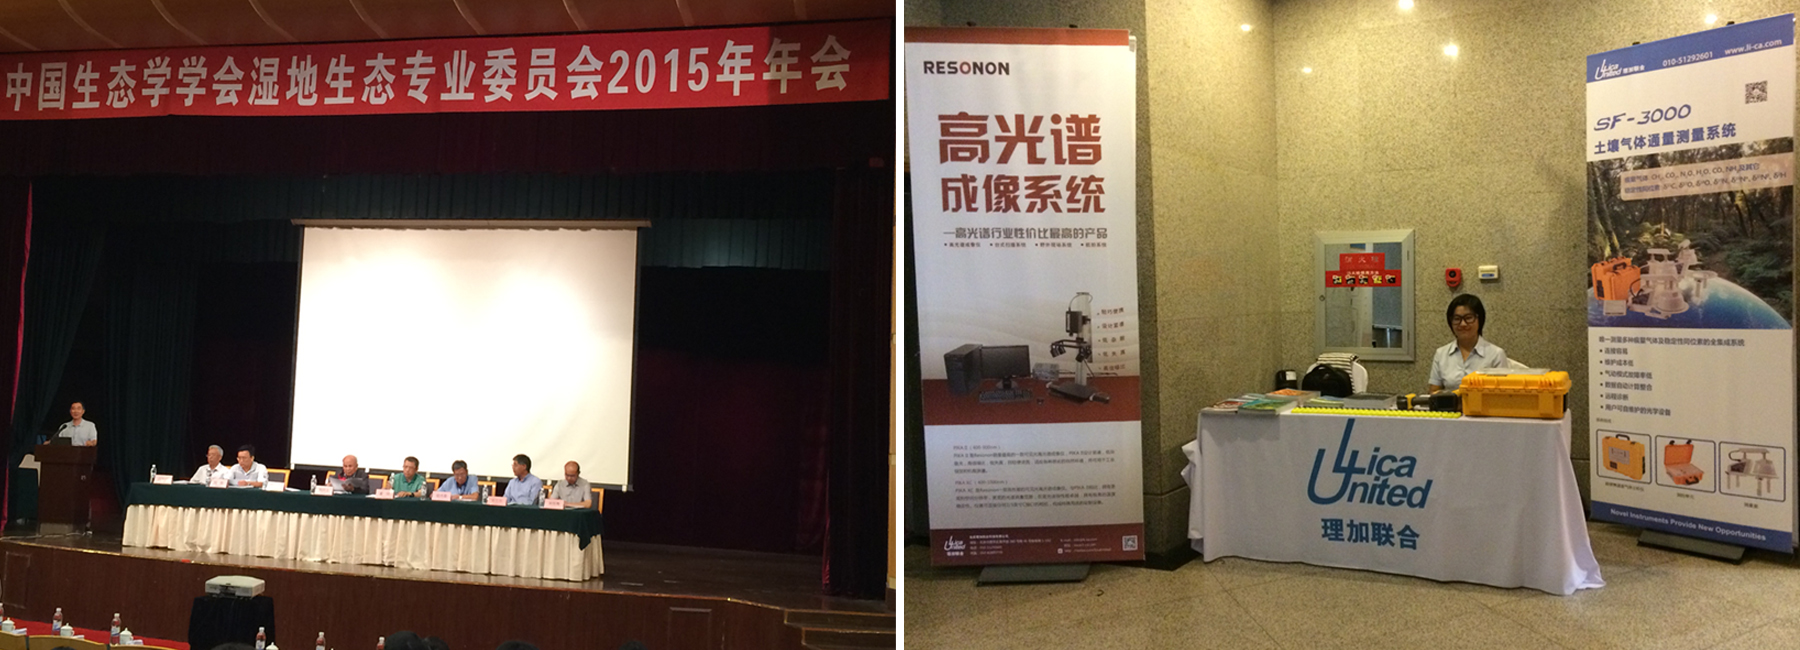 2015 Annual Meeting of Wetland Ecology Commitee, Ecological Society of China